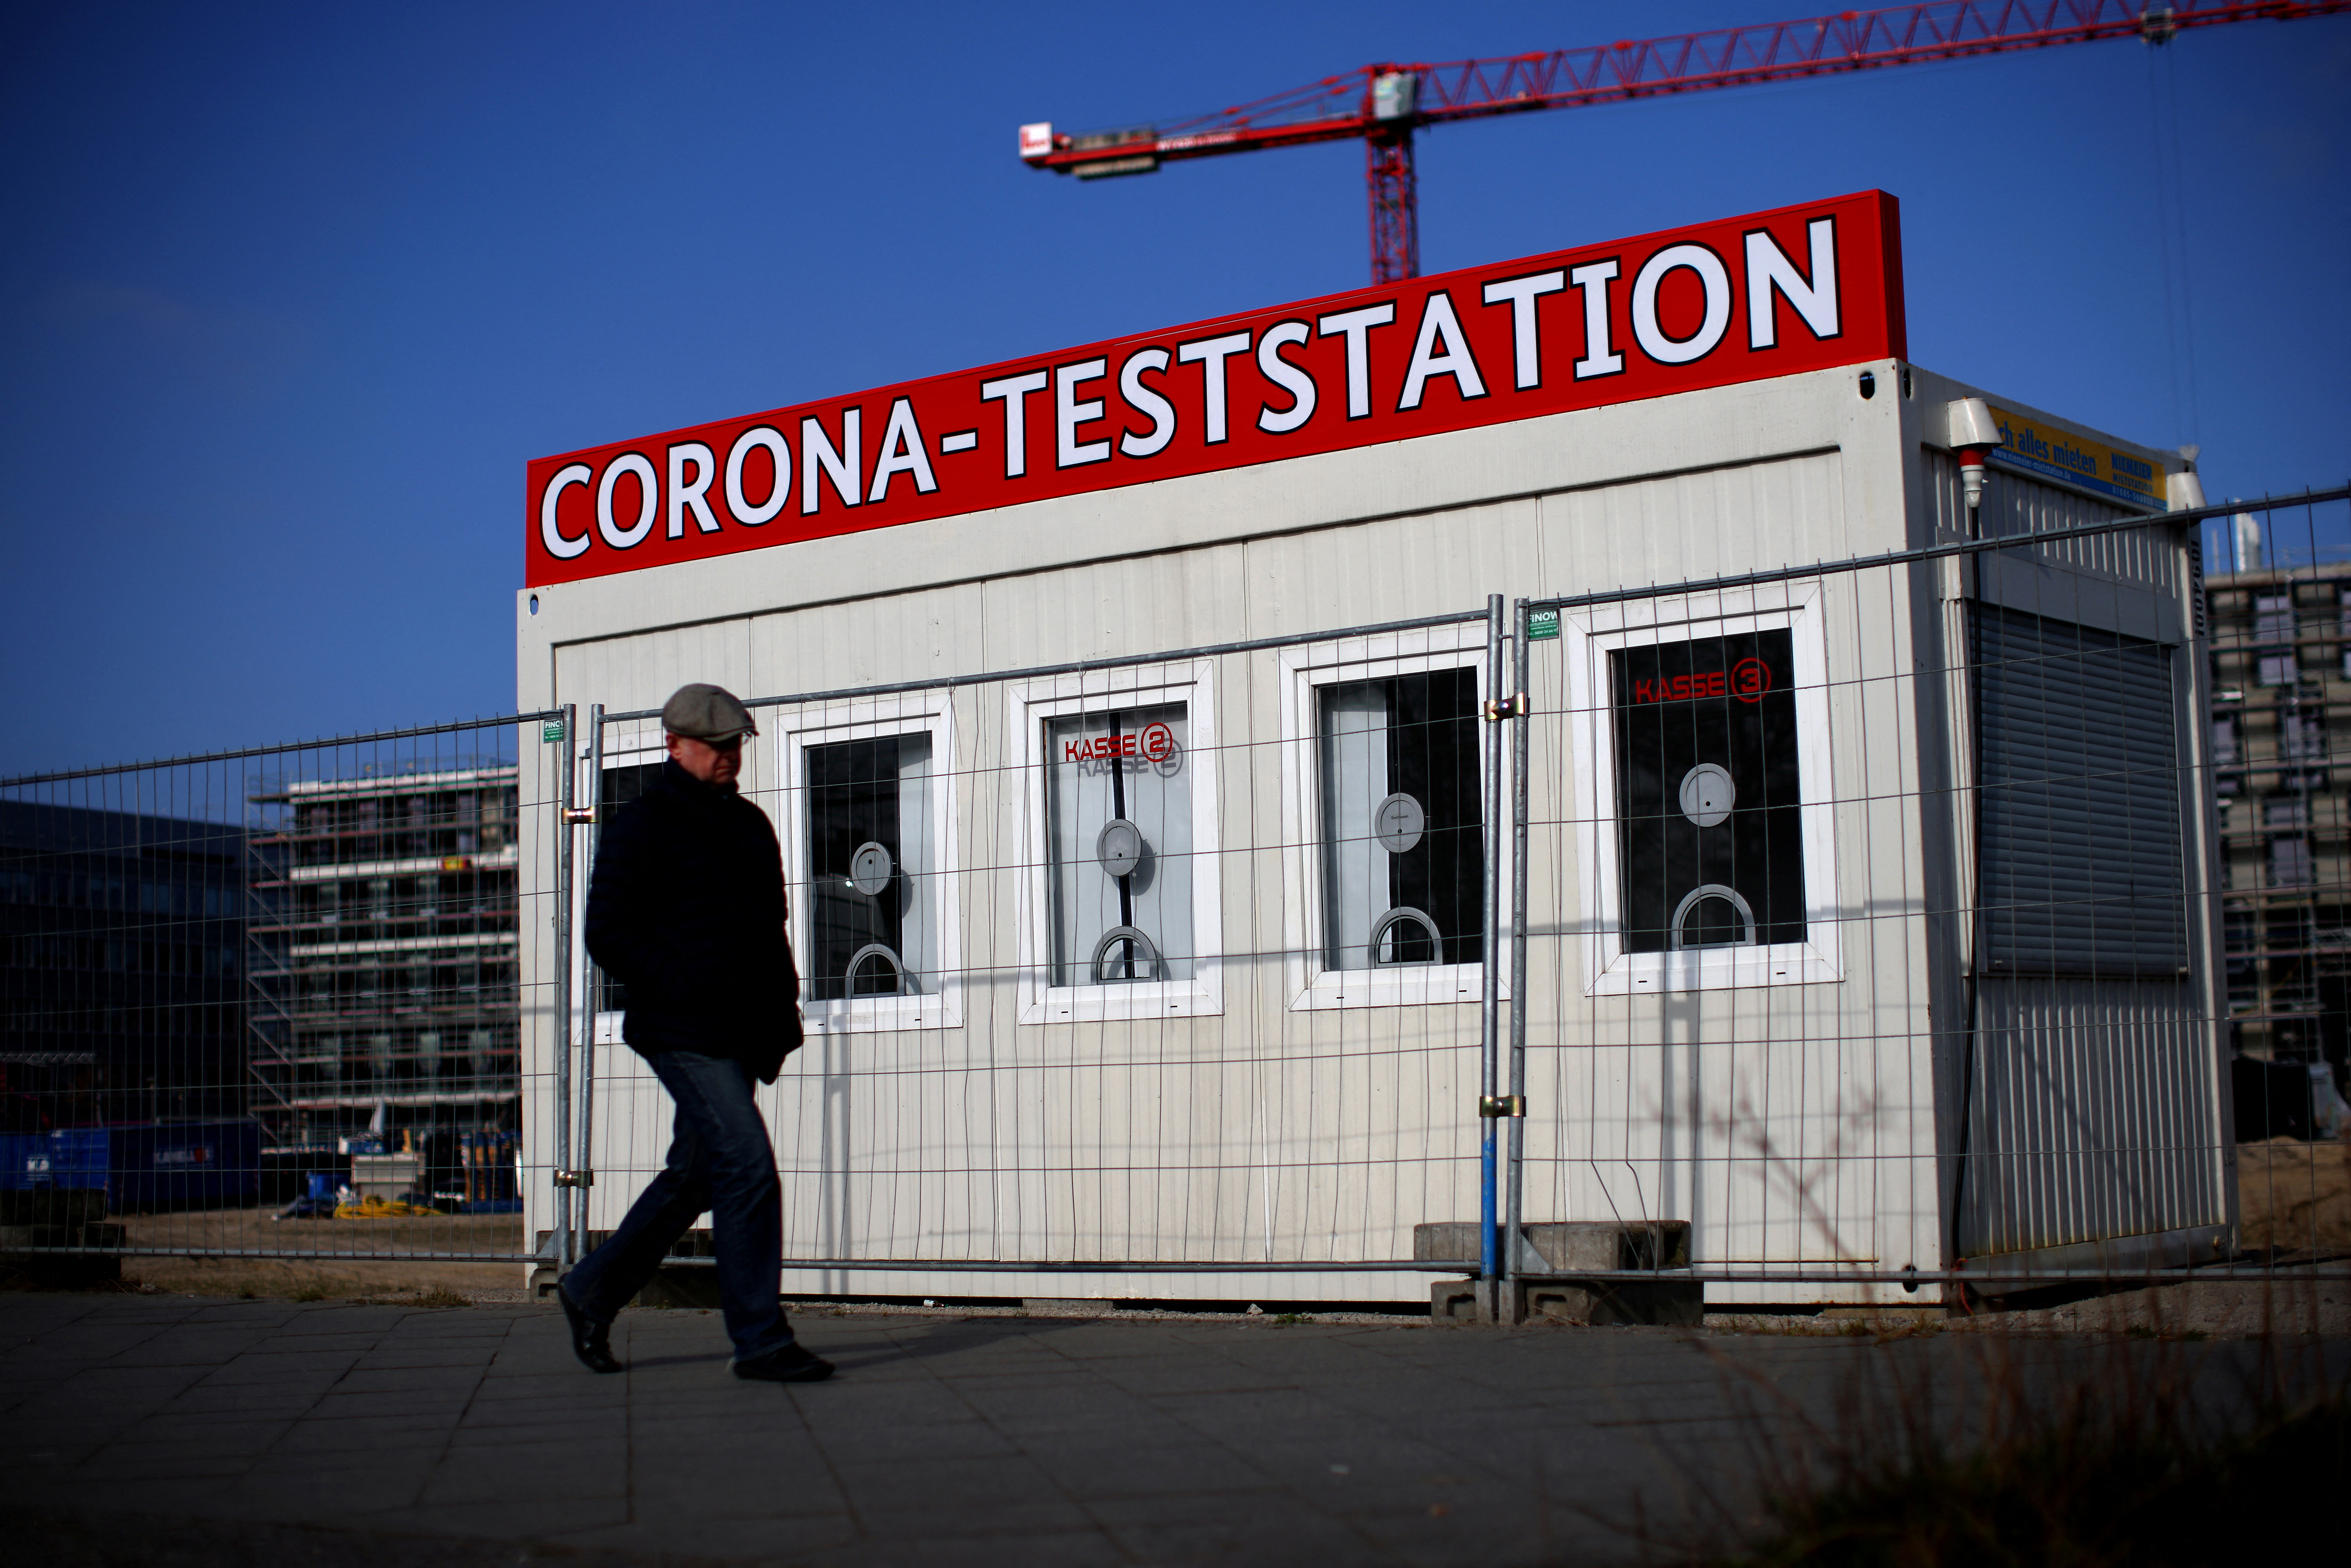 A person walks past a closed COVID-19 testing station in Berlin